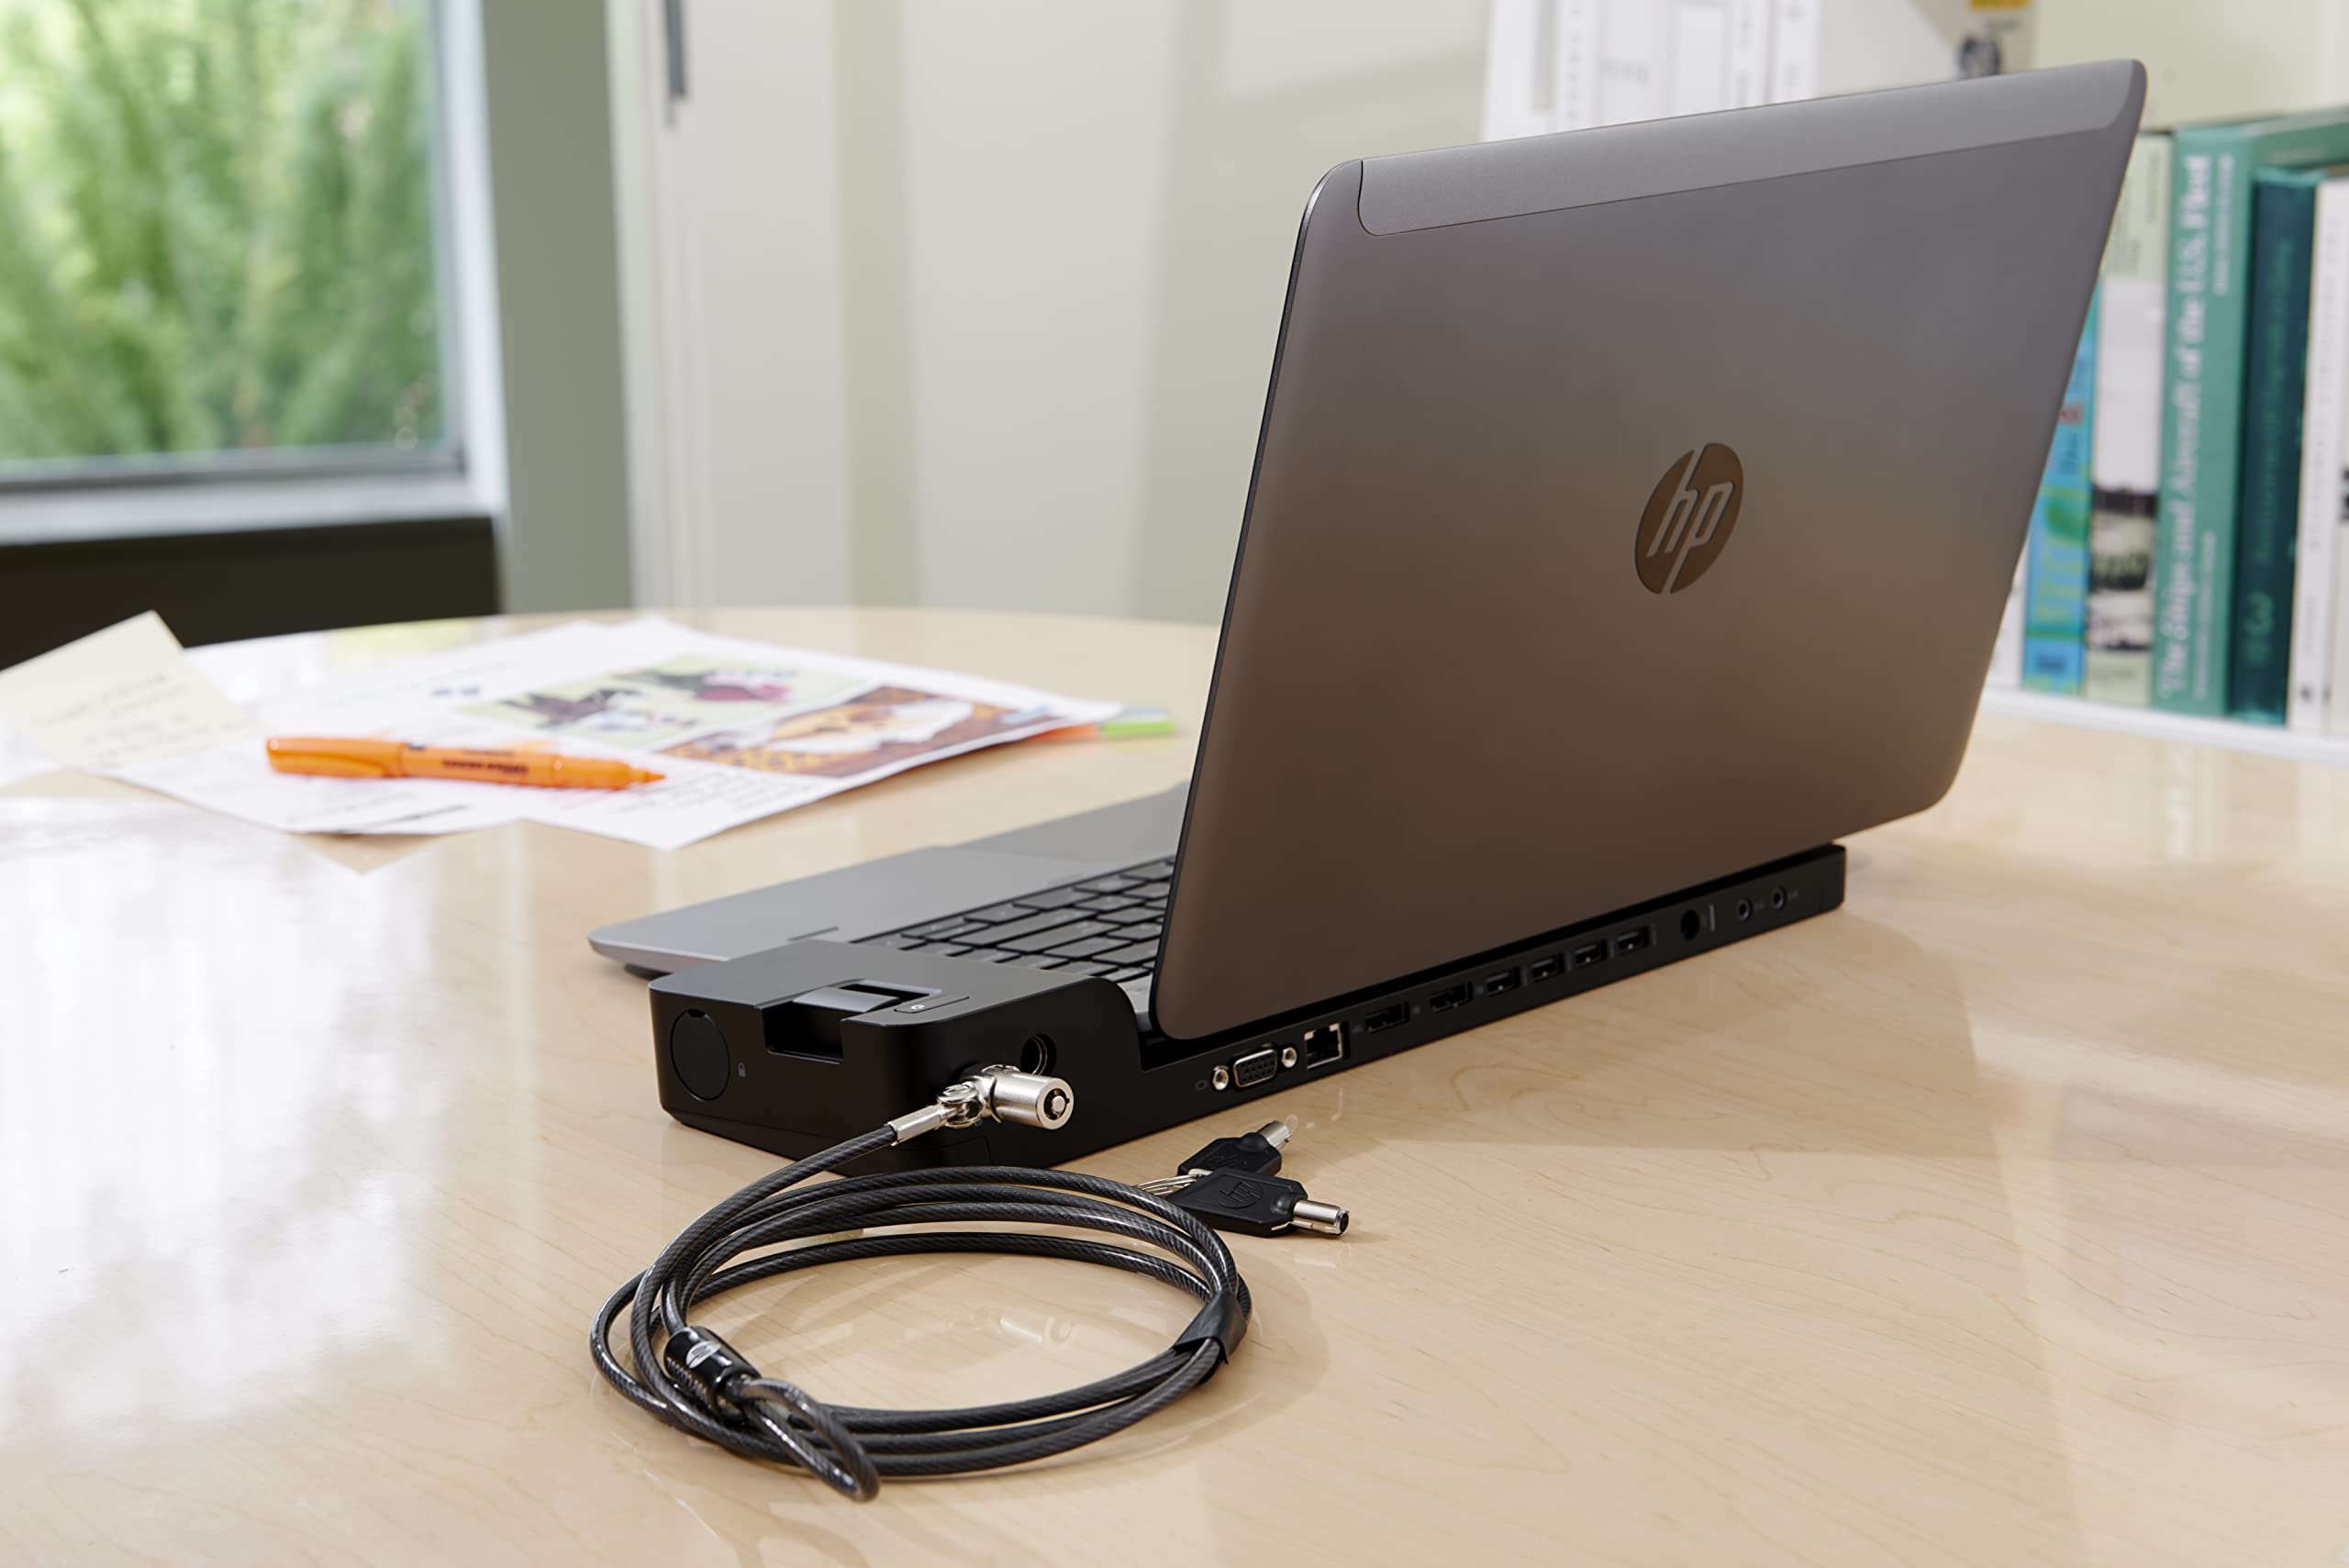 HP 2013 D9Y32AA UltraSlim Docking Station with 65W Adapter D9Y32AA#ABA compatible with HP EliteBook Folio 9470m